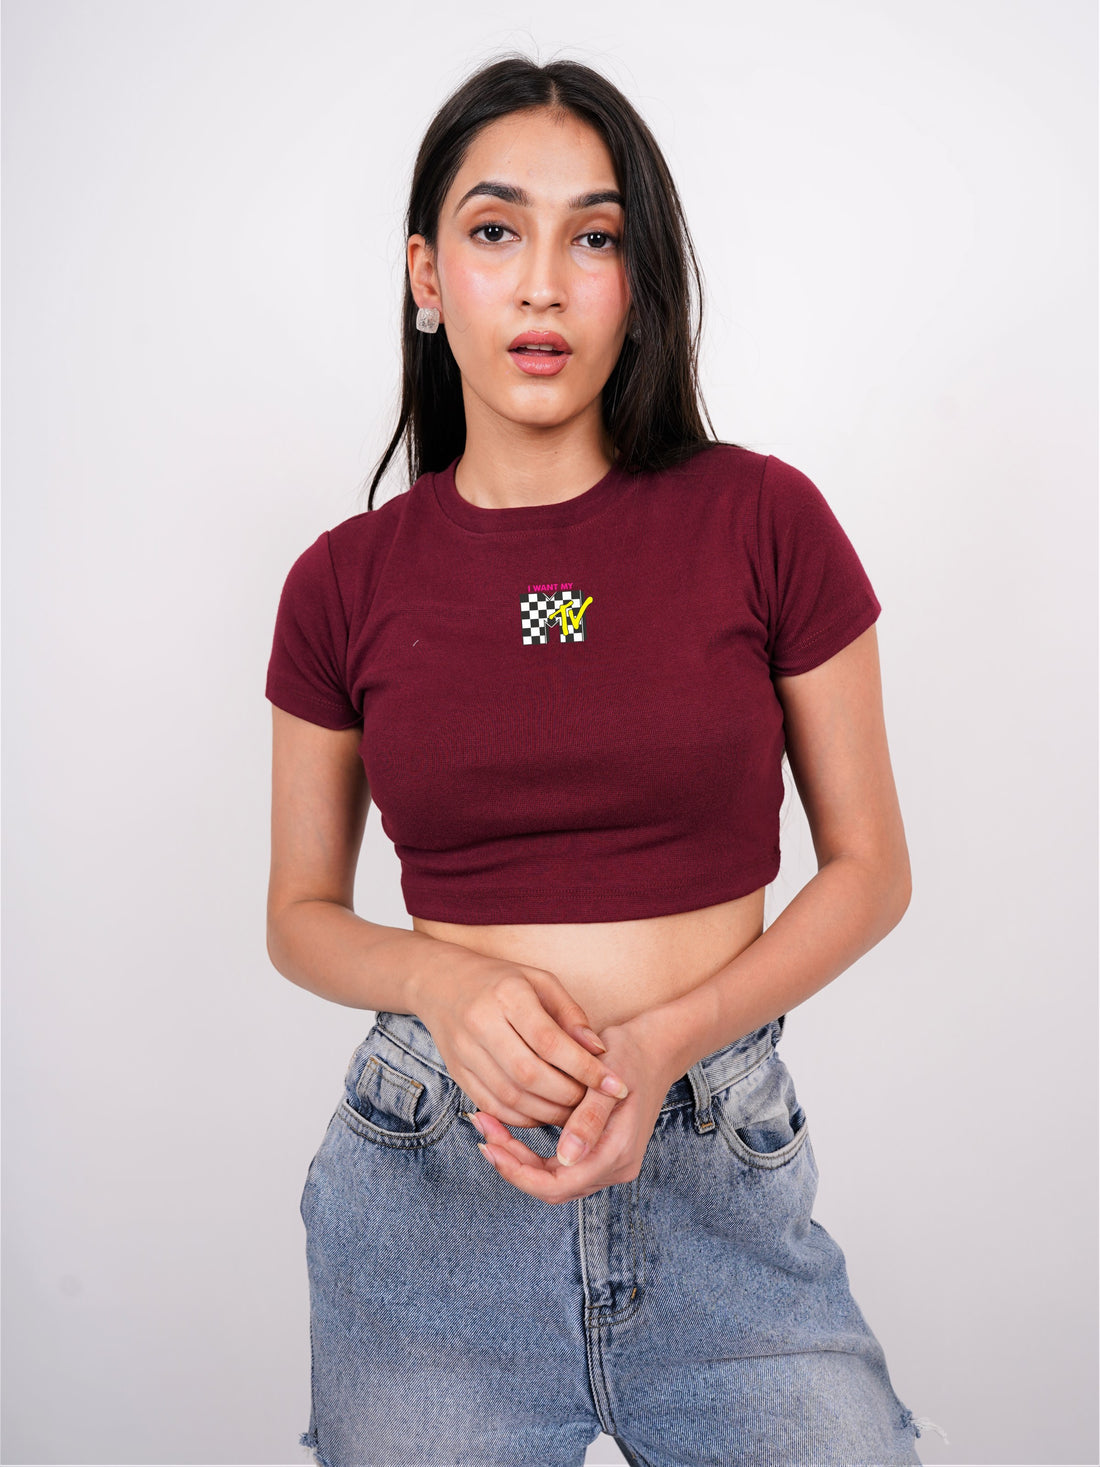 I Want My MTV Check - Burger Bae Round Neck Crop Baby Tee For Women